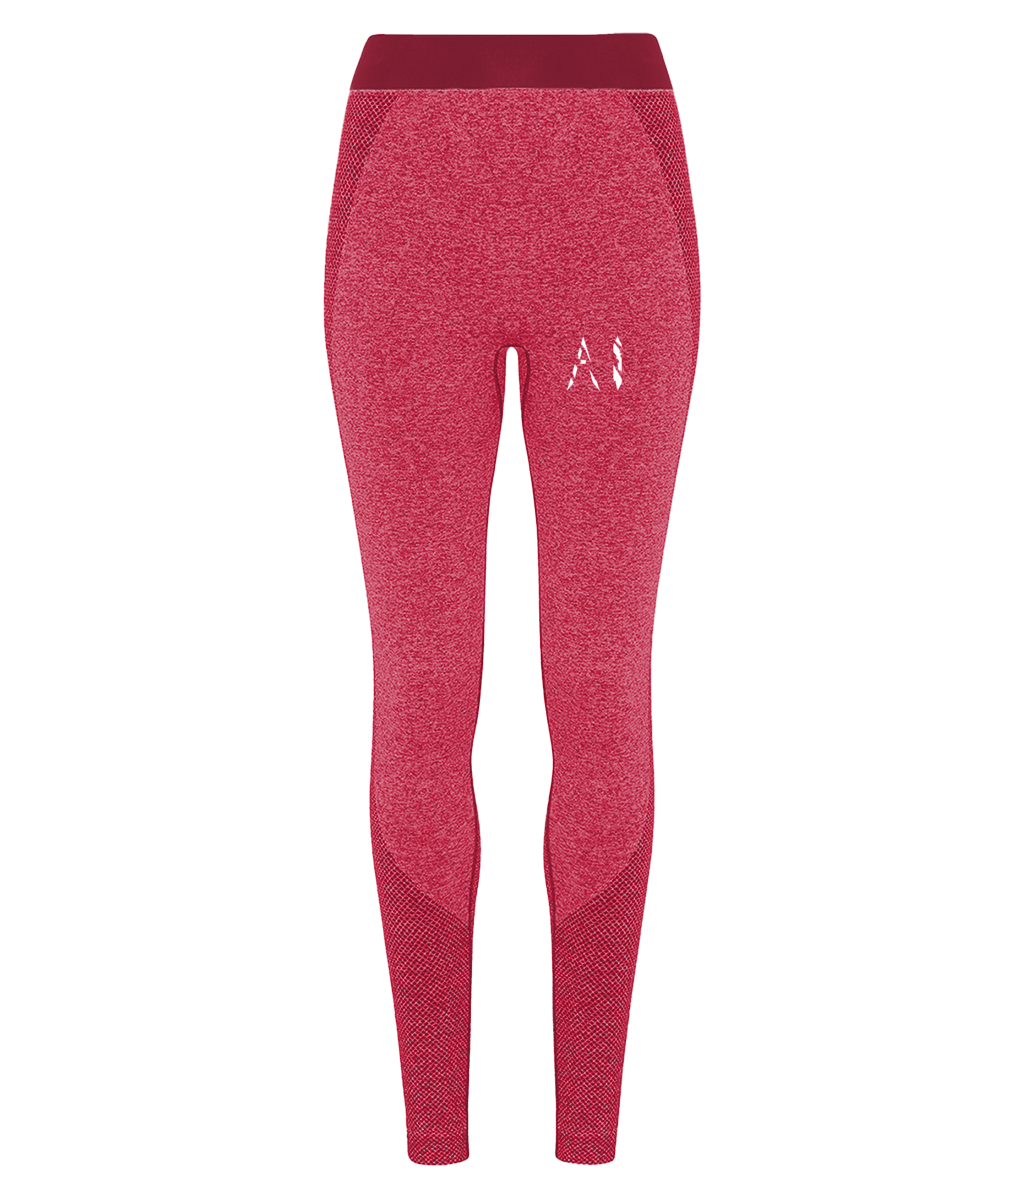 Womens rose red Athletic Seamless Sports Leggings with White AI logo on upper thigh